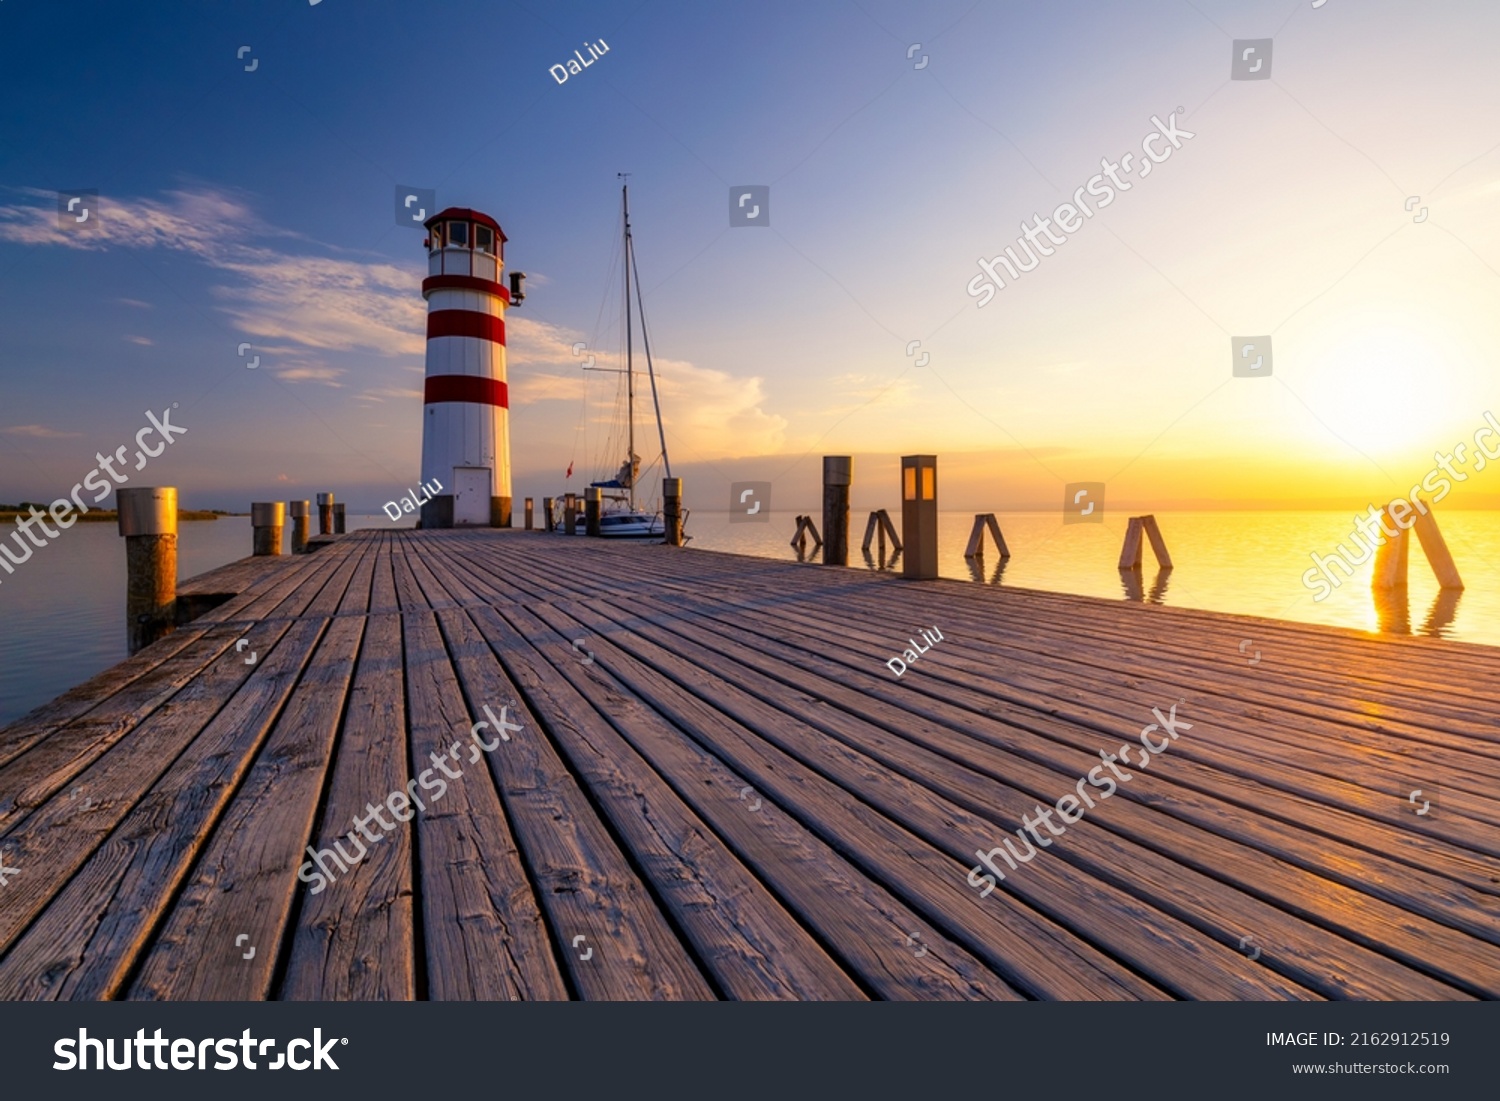 Lighthouse at Lake Neusiedl, Podersdorf am See, Burgenland, Austria. Lighthouse at sunset in Austria. Wooden pier with lighthouse in Podersdorf on lake Neusiedl in Austria. #2162912519